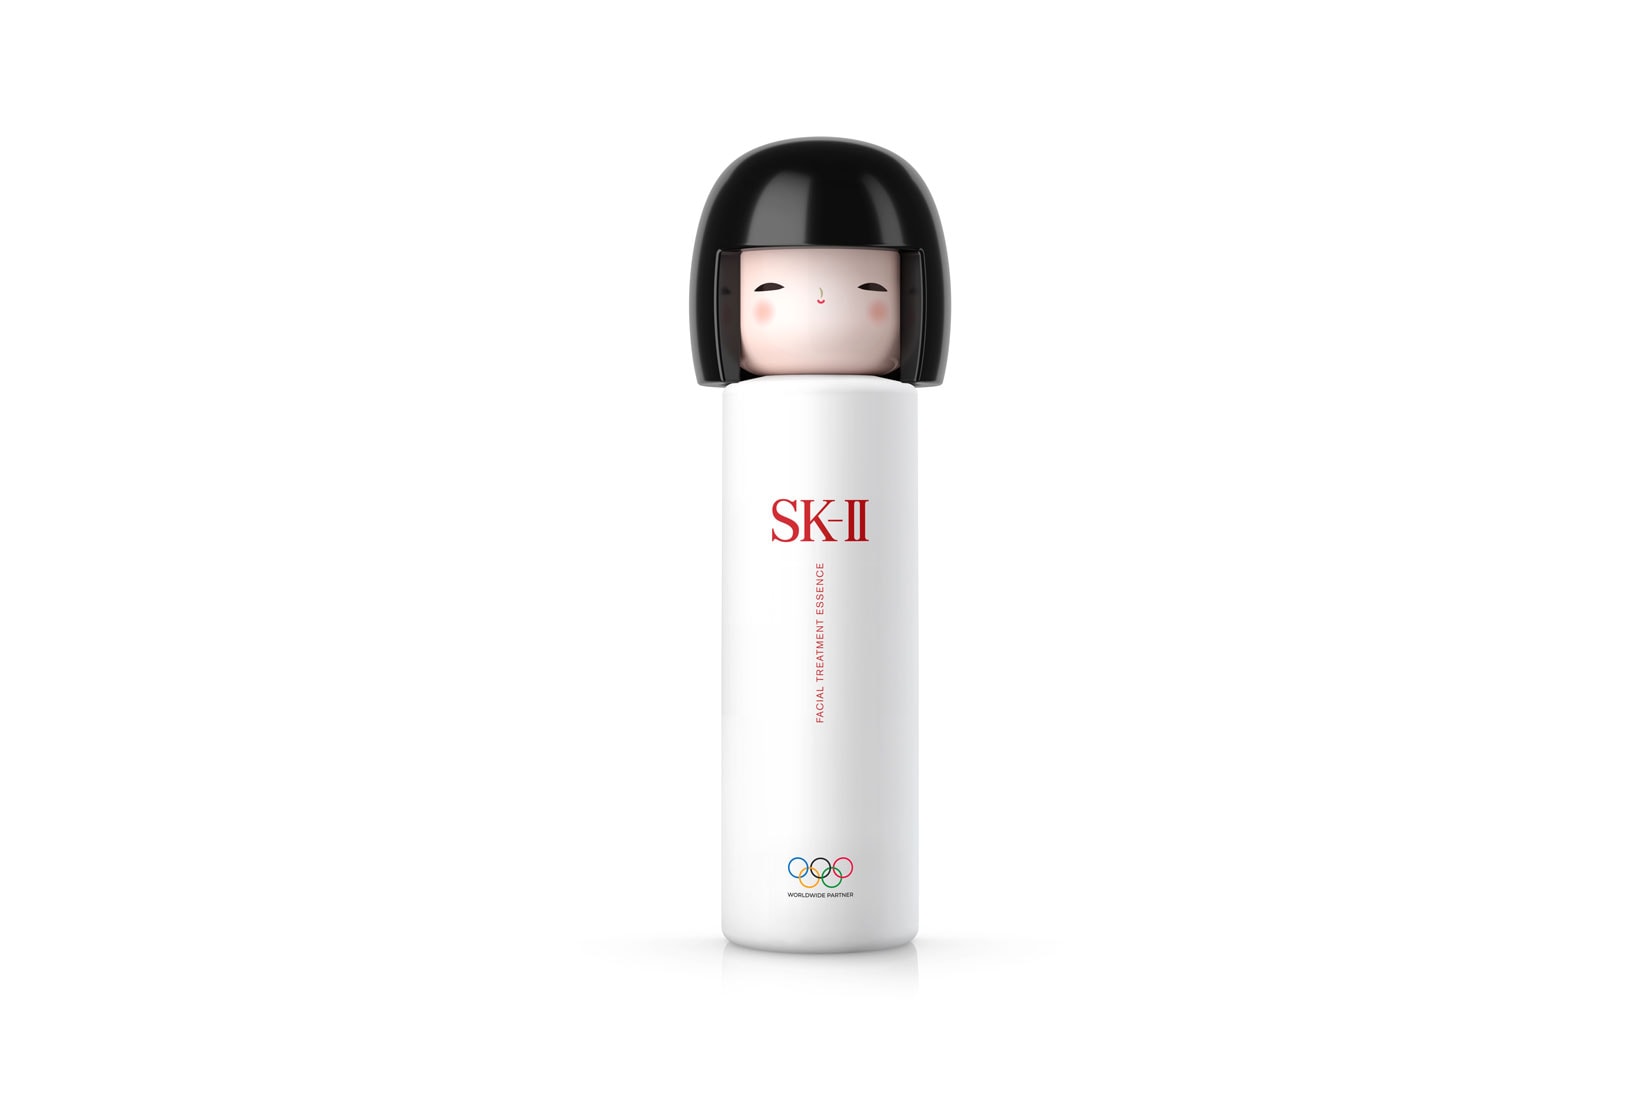 SK-II Facial Treatment Essence Tokyo Doll Olympics 2020 Bottle Exclusive